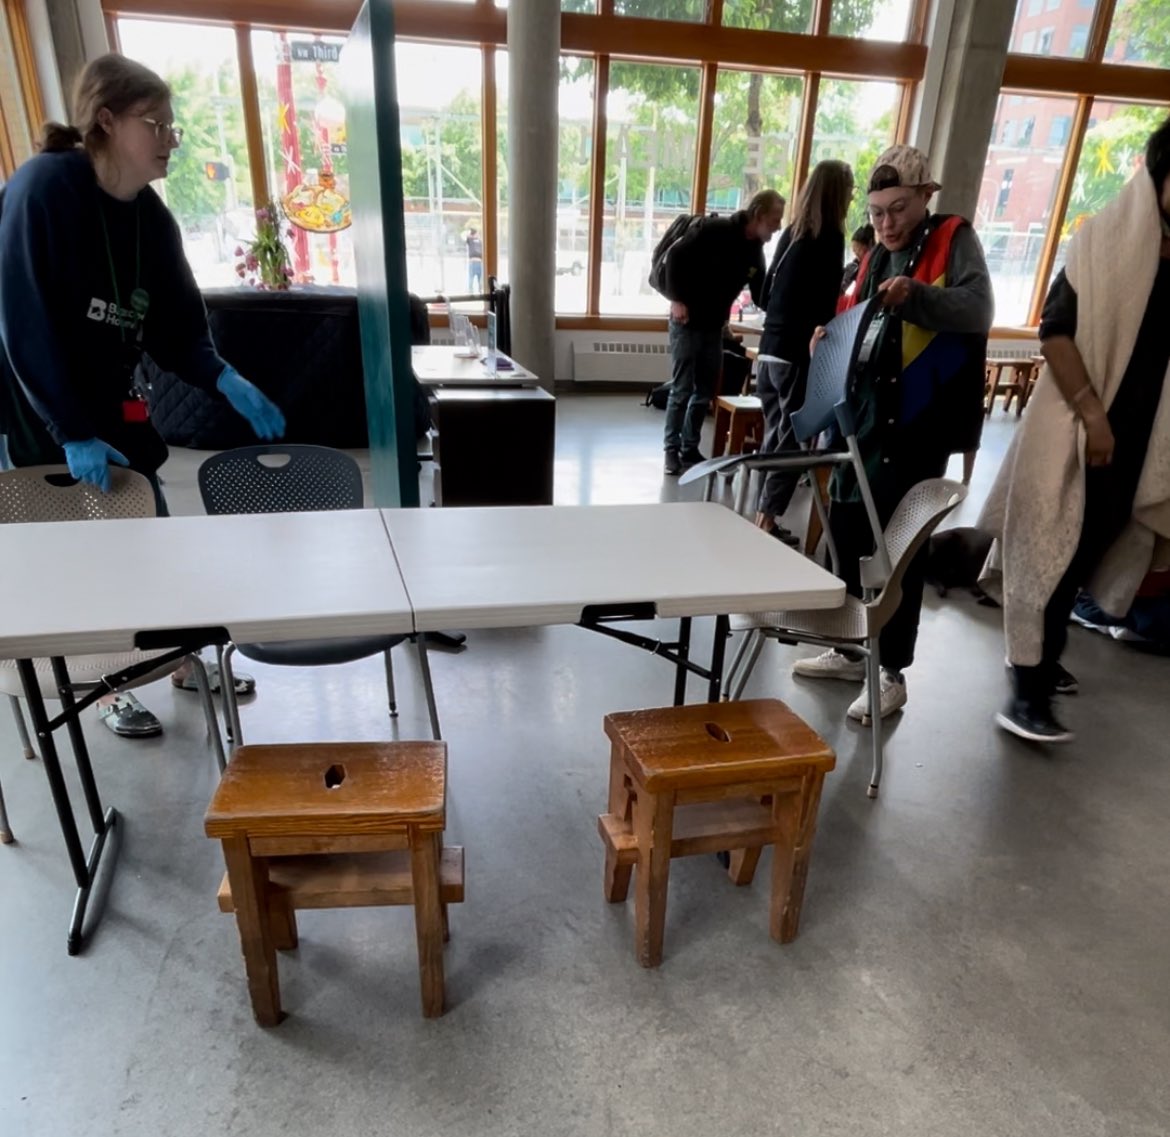 Our team quickly set up a folding table and chairs for a family of six to be able to enjoy lunch together today. The smiles of children bring a lot of joy to the cafe. We try to make a meal in our cafe as pleasant as possible for kids and send them off with extra snacks and